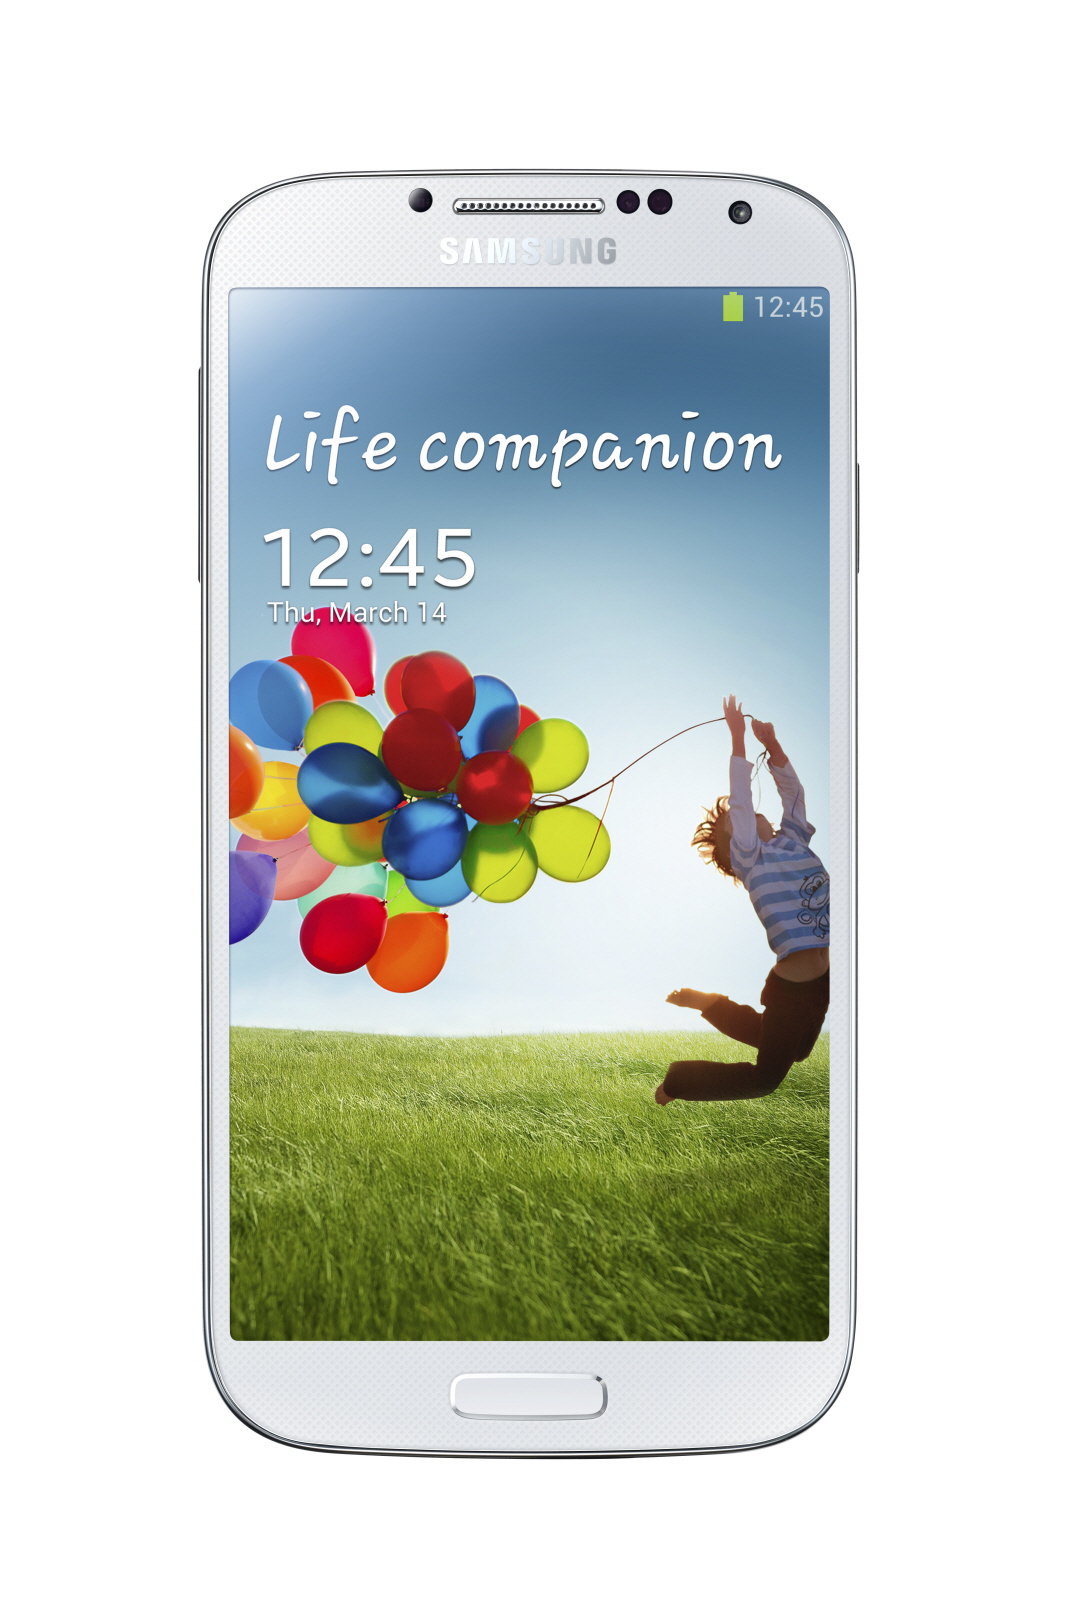 World of Wallpapers: Samsung Galaxy S4